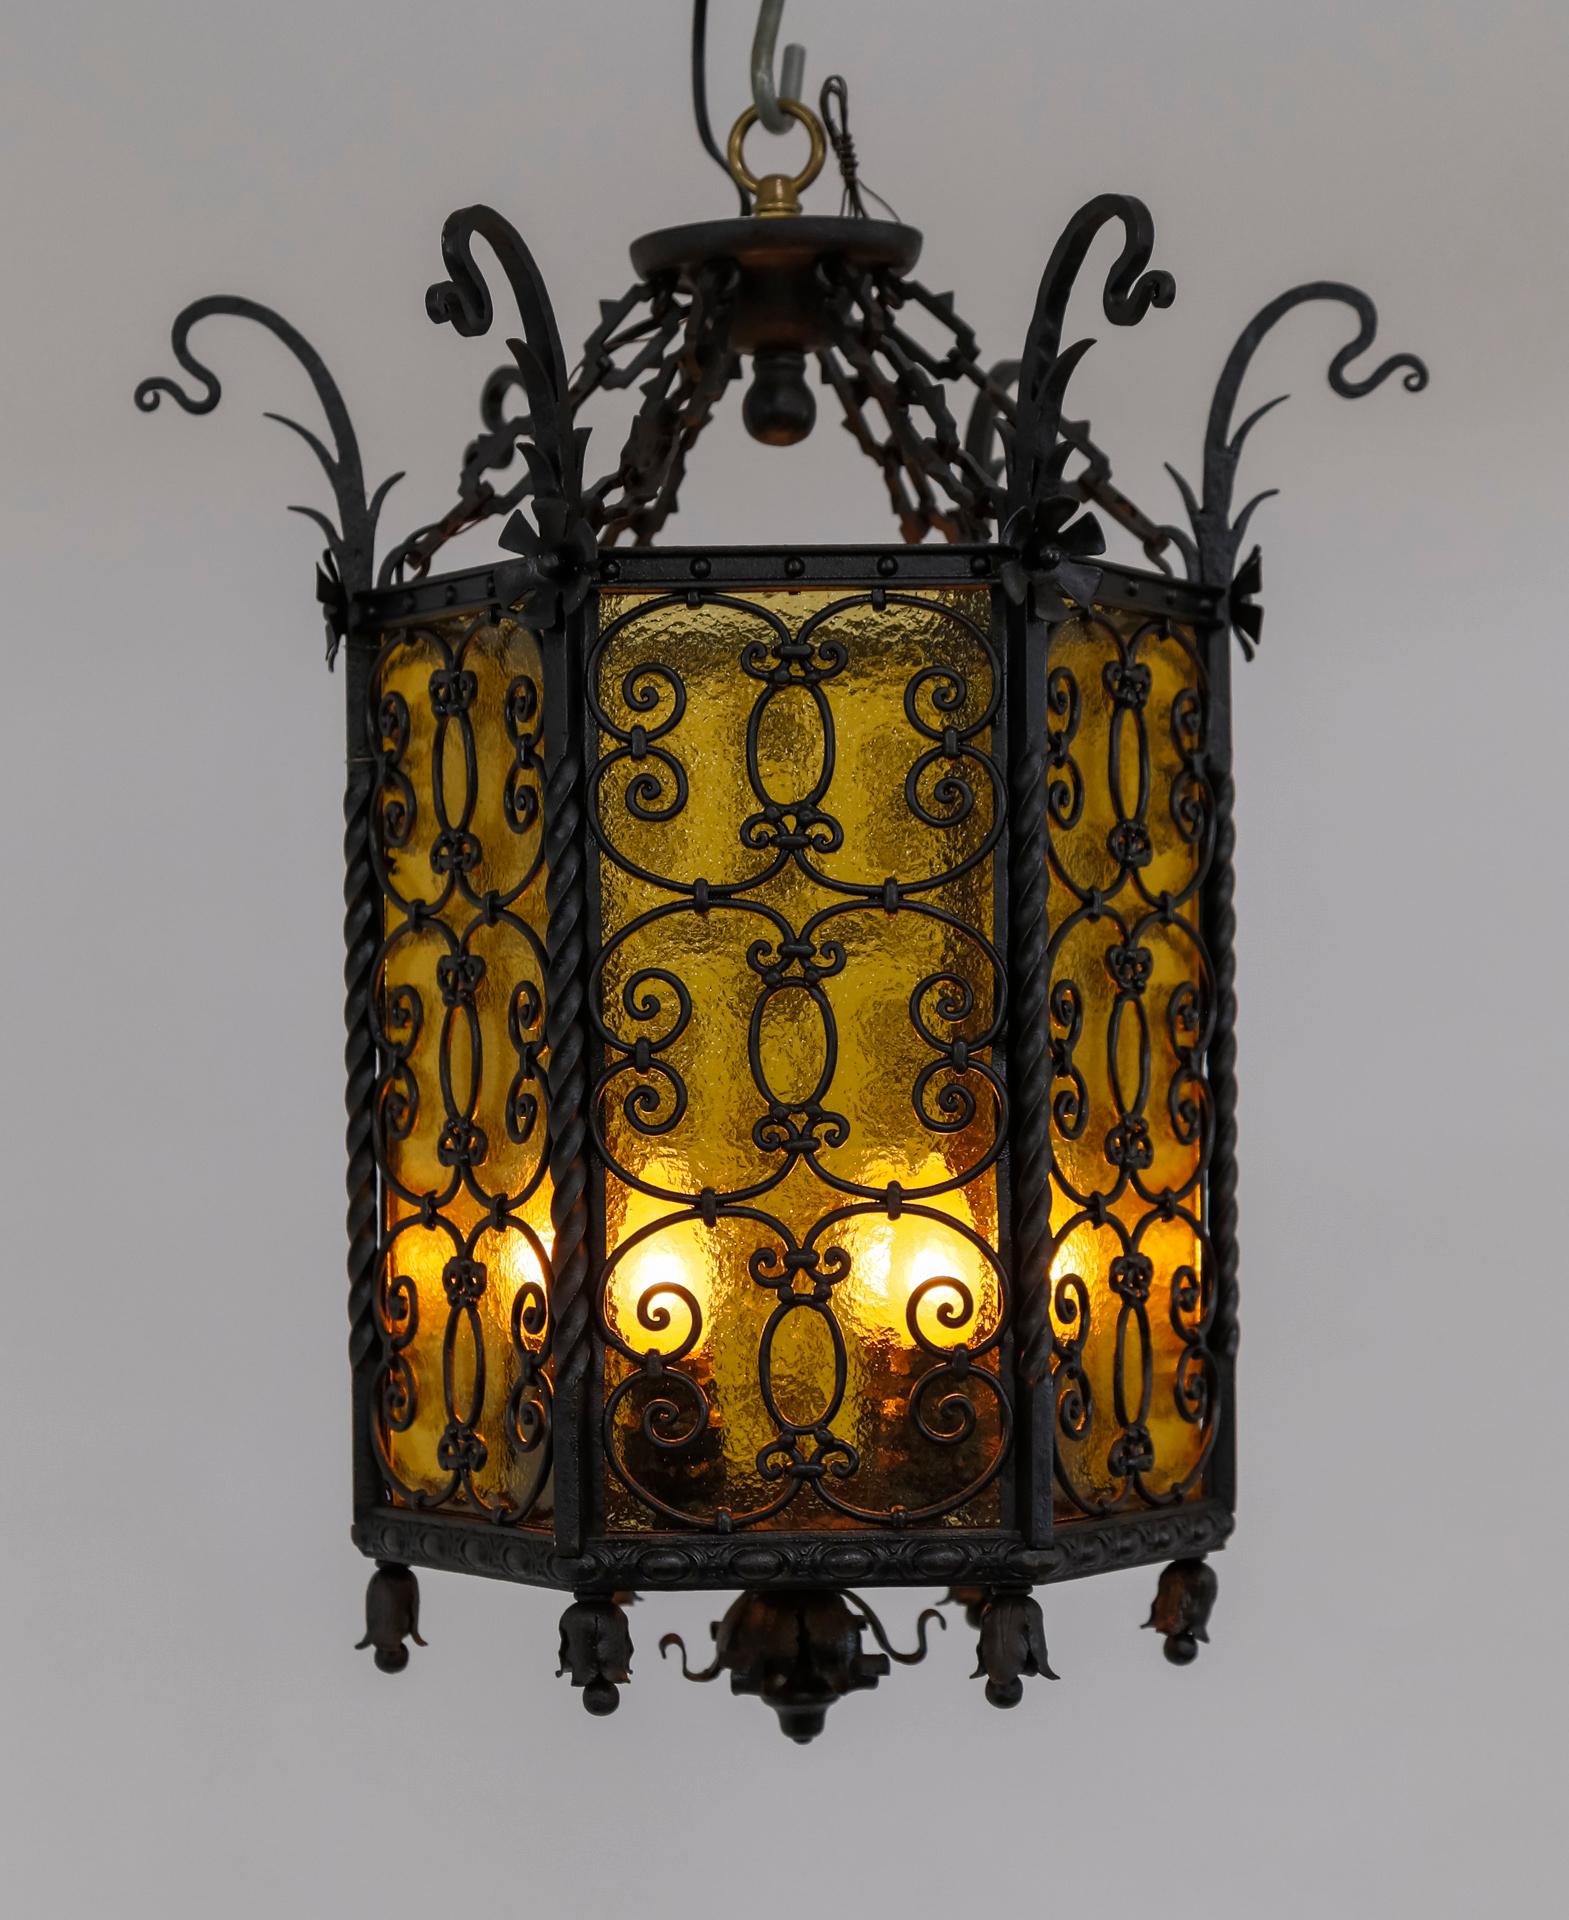 A slick, black wrought iron structure gives this early 20th century, semi-flush mount light fixture a striking appearance. It combines Gothic Revival and Art Nouveau styles, with notable whiplash curls, as well as egg-and-dart trim, stylized